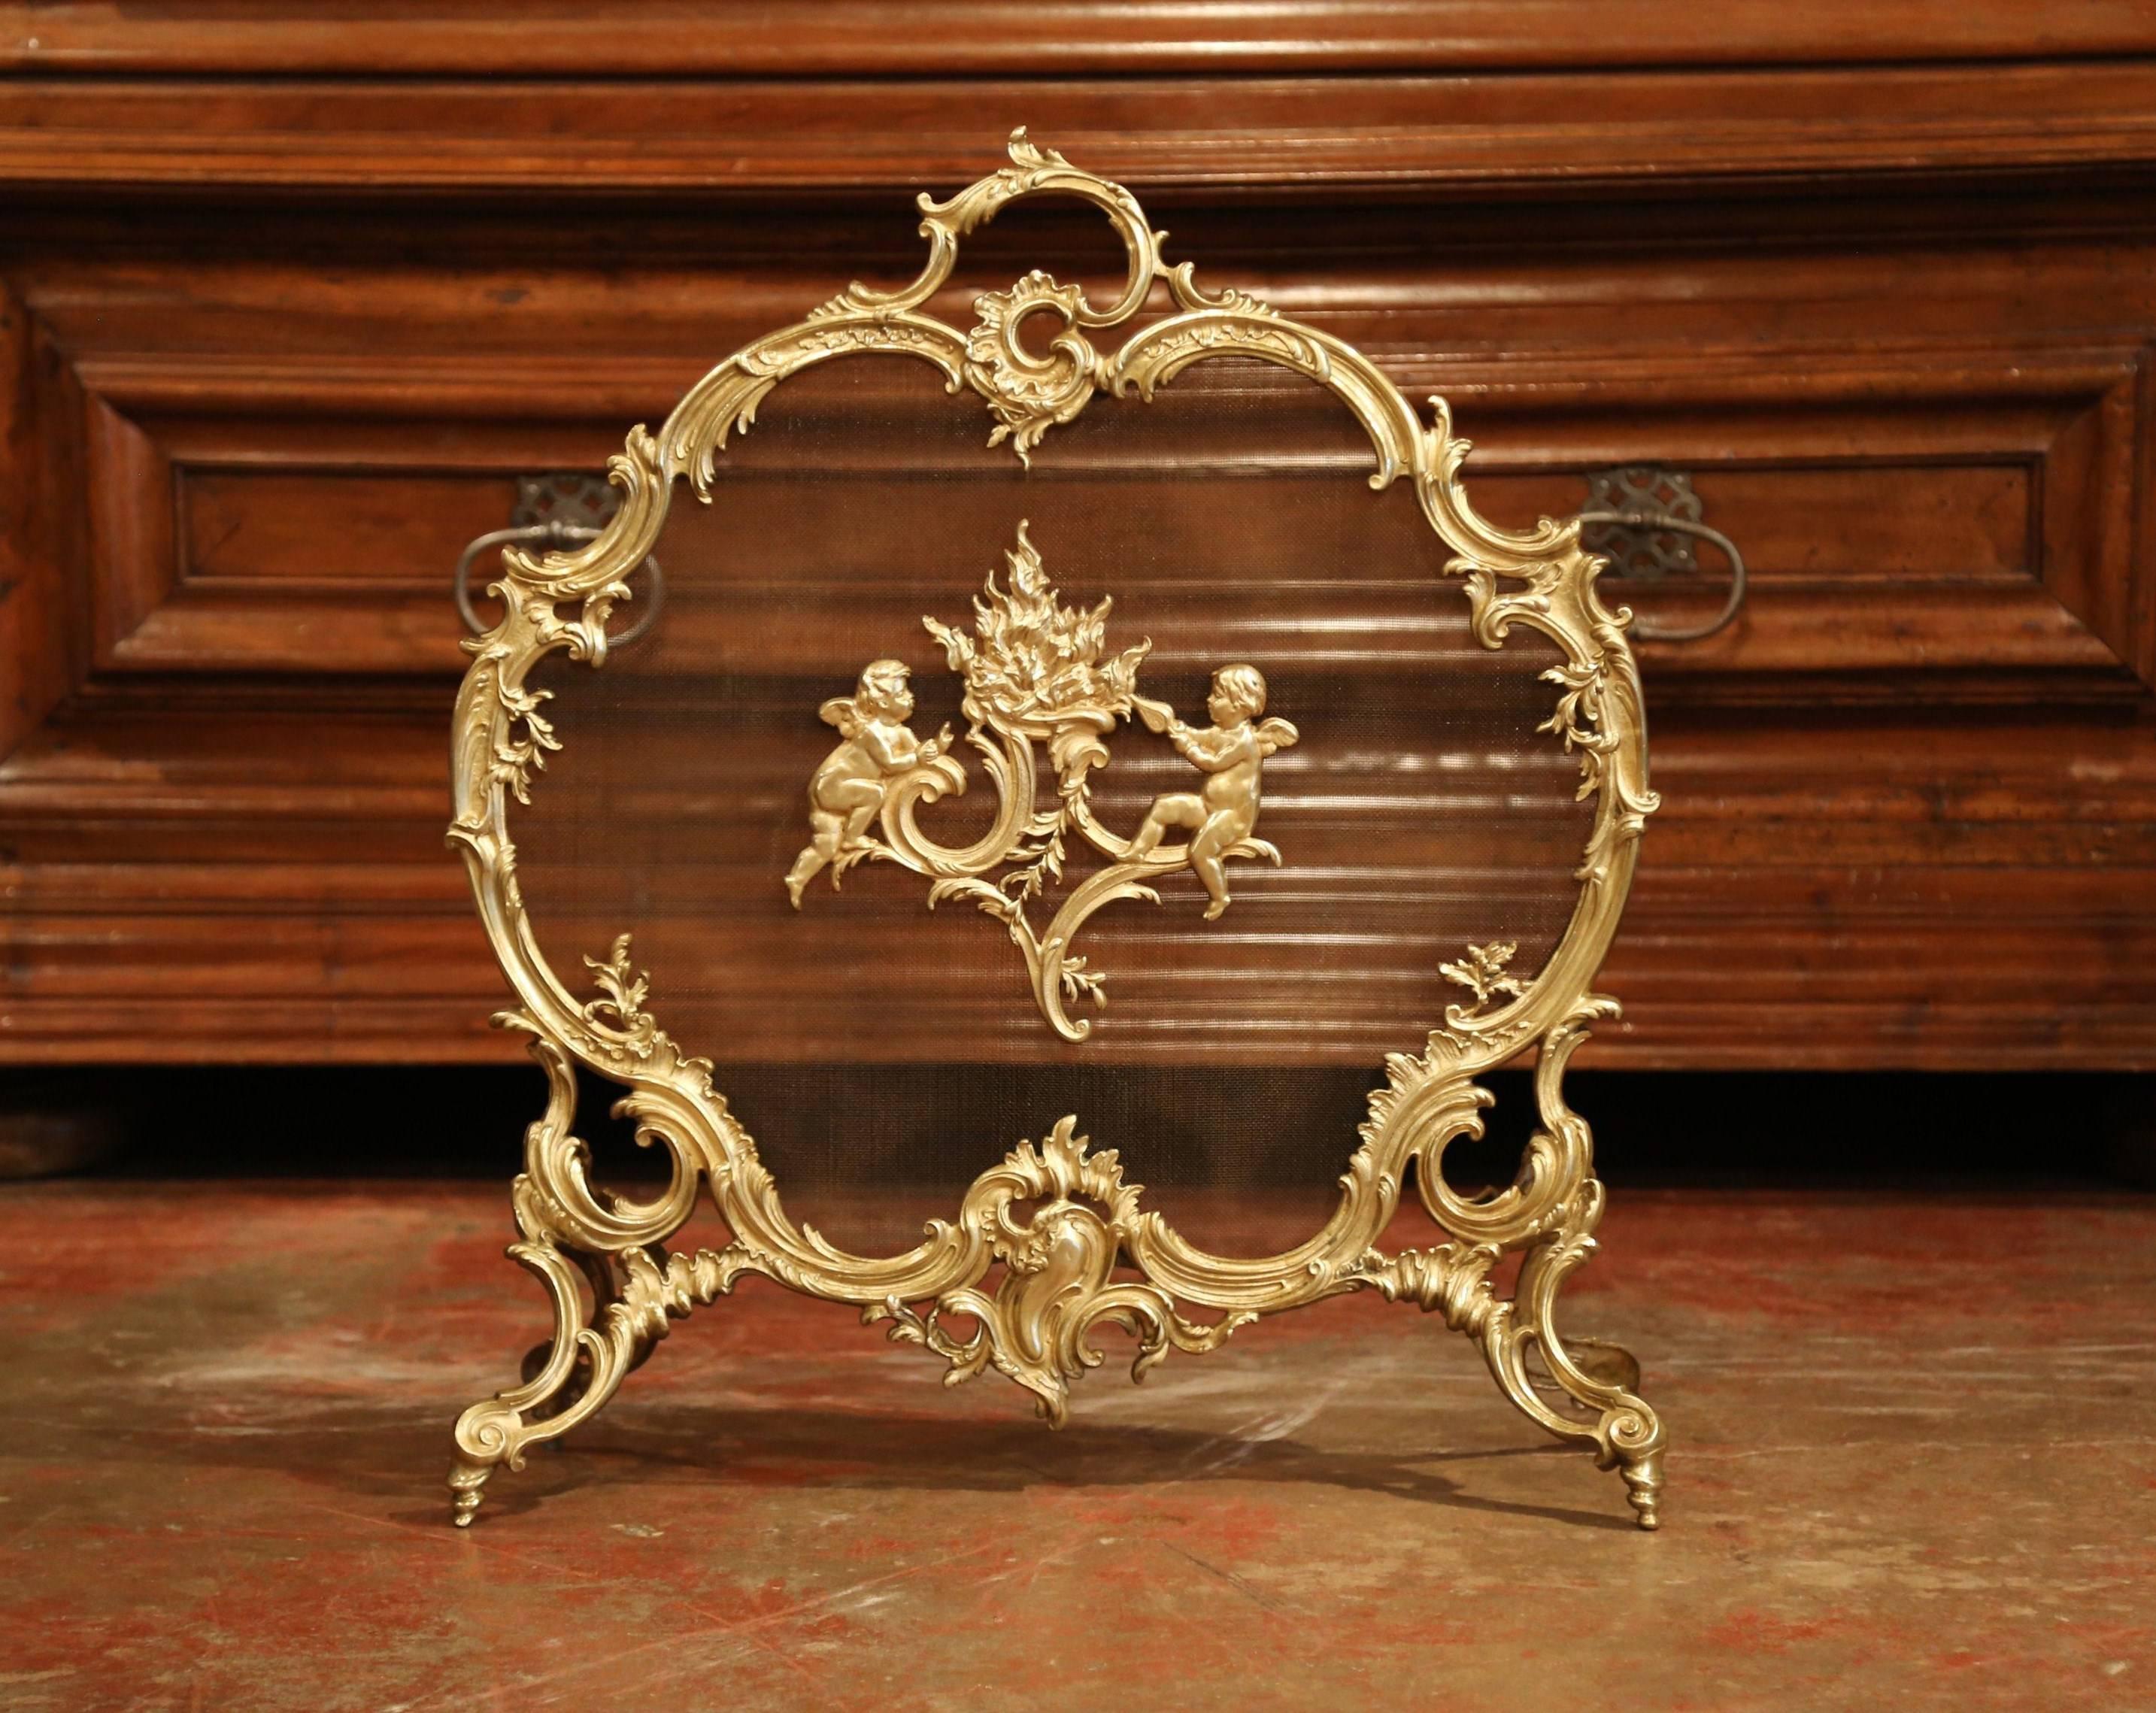 19th Century French Louis XV Carved Gilt Bronze Fireplace Screen with Cherubs 1